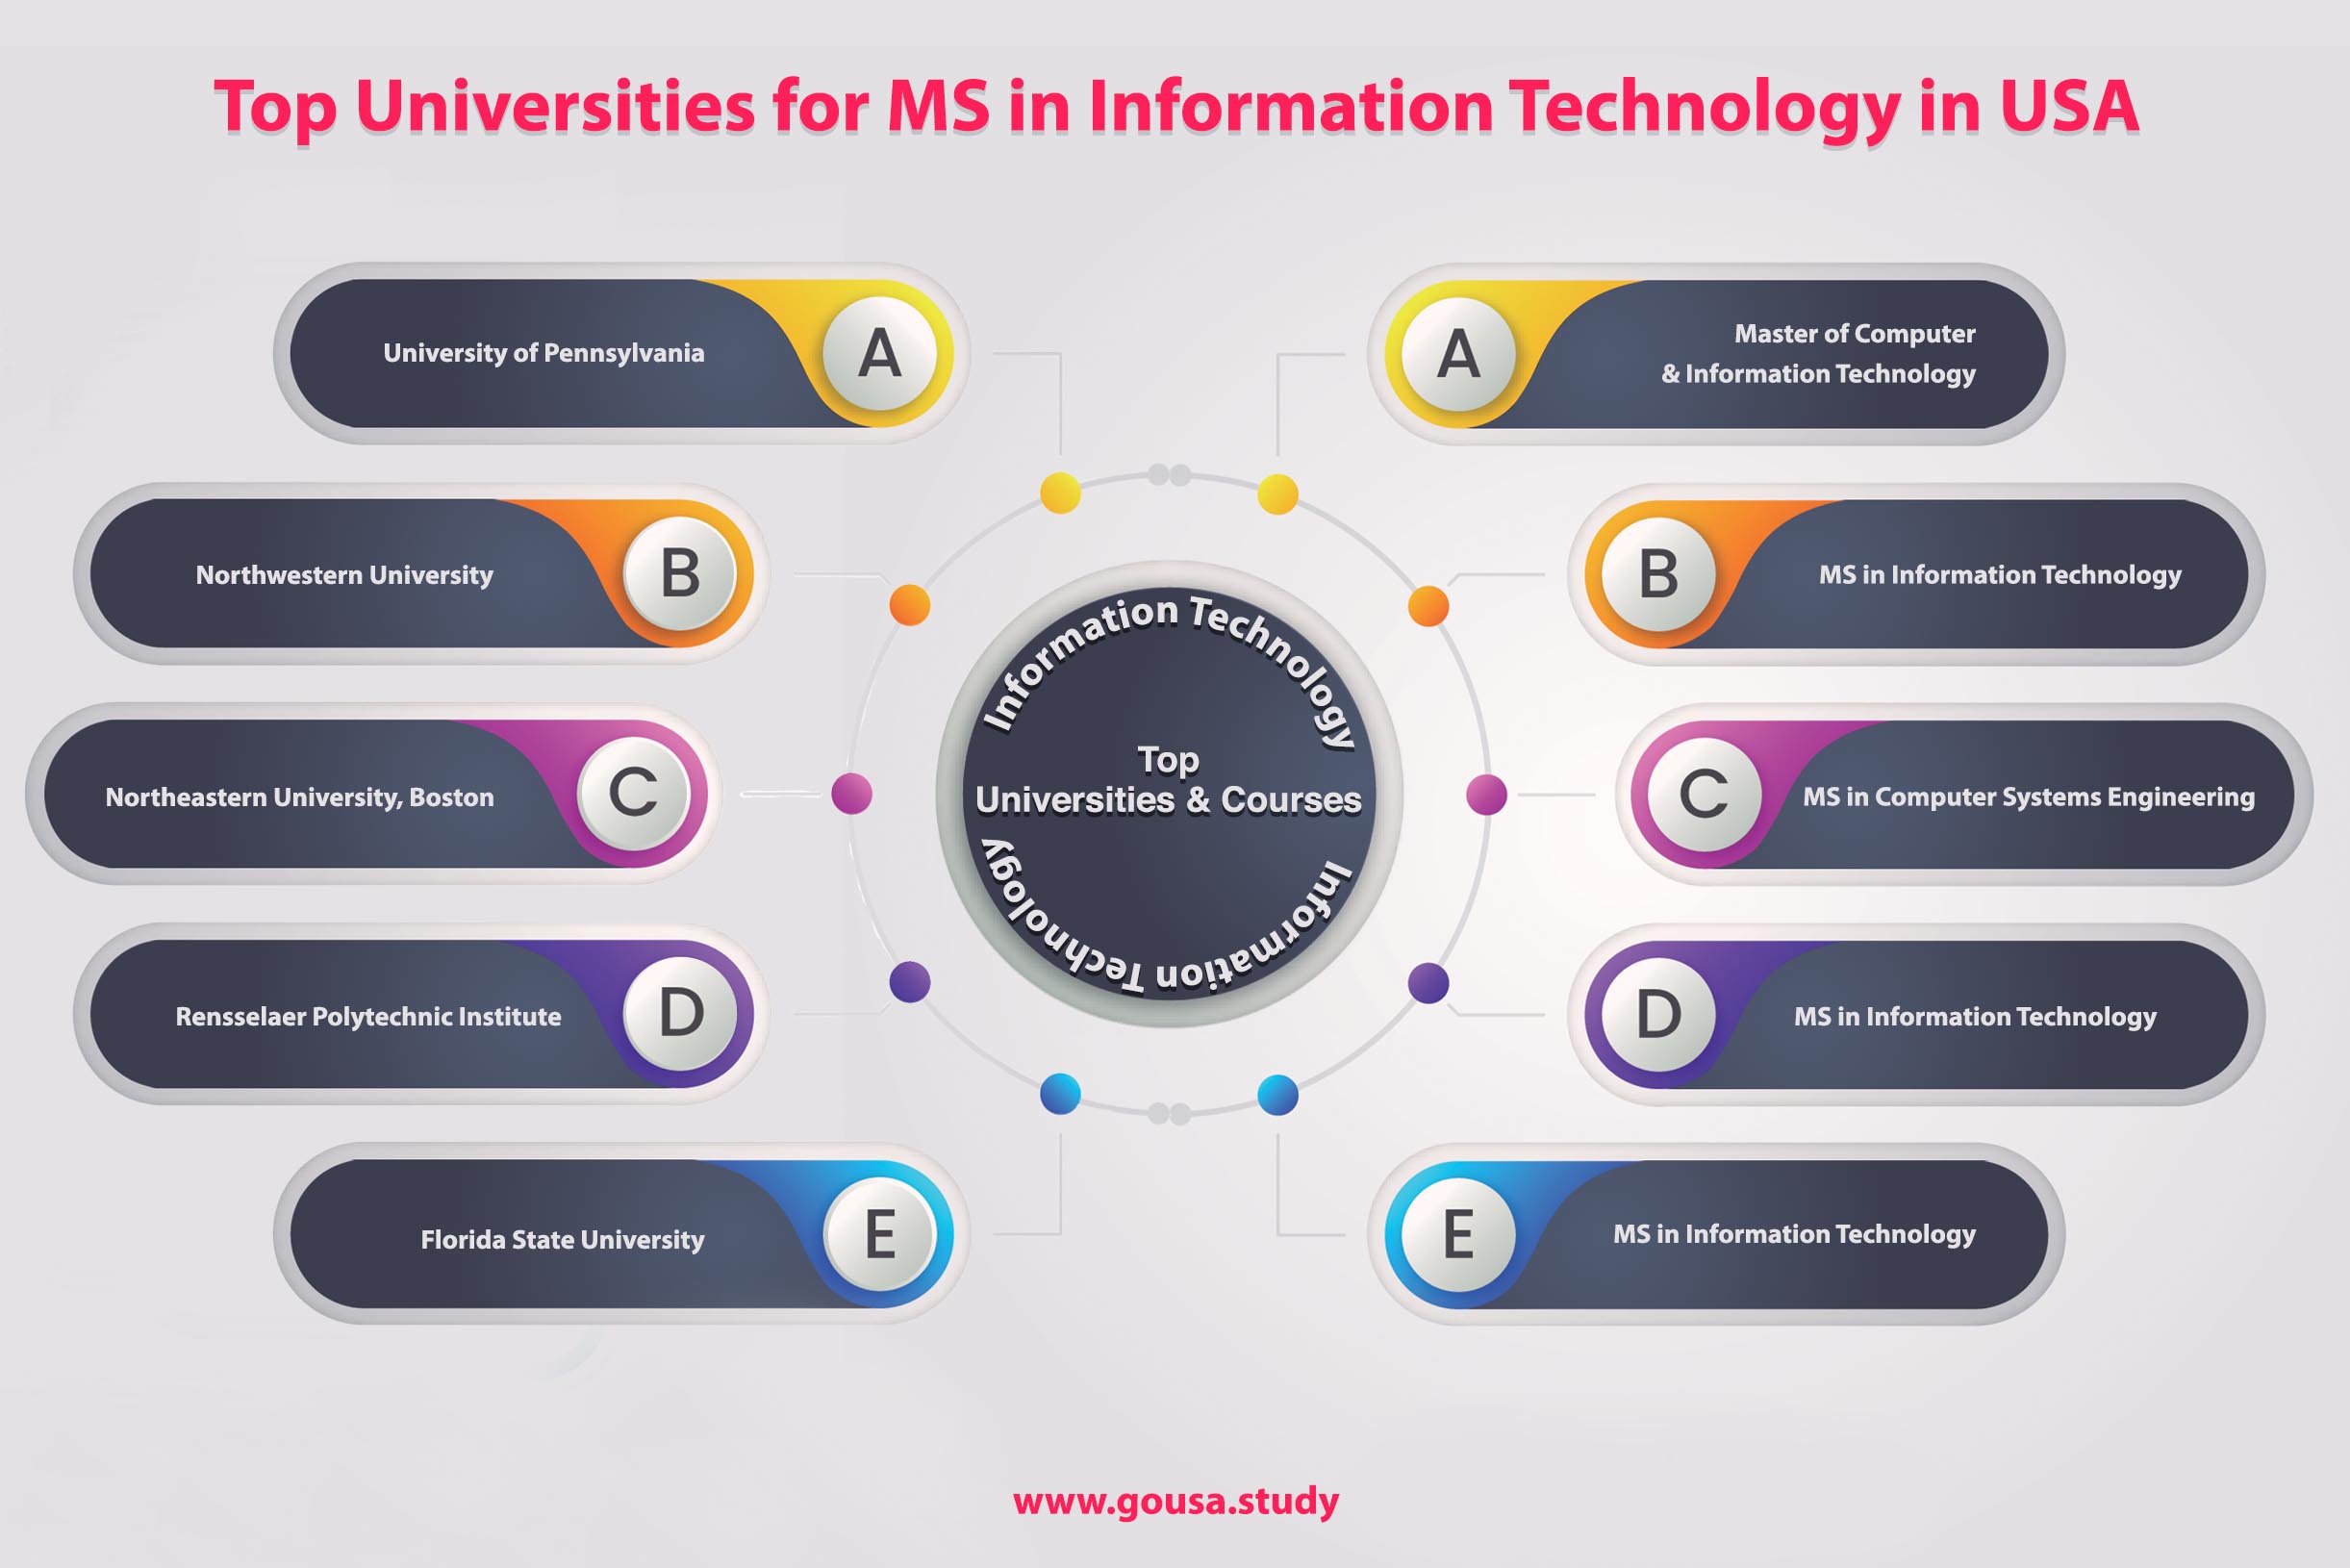 Top Universities for MS in Information Technology in USA